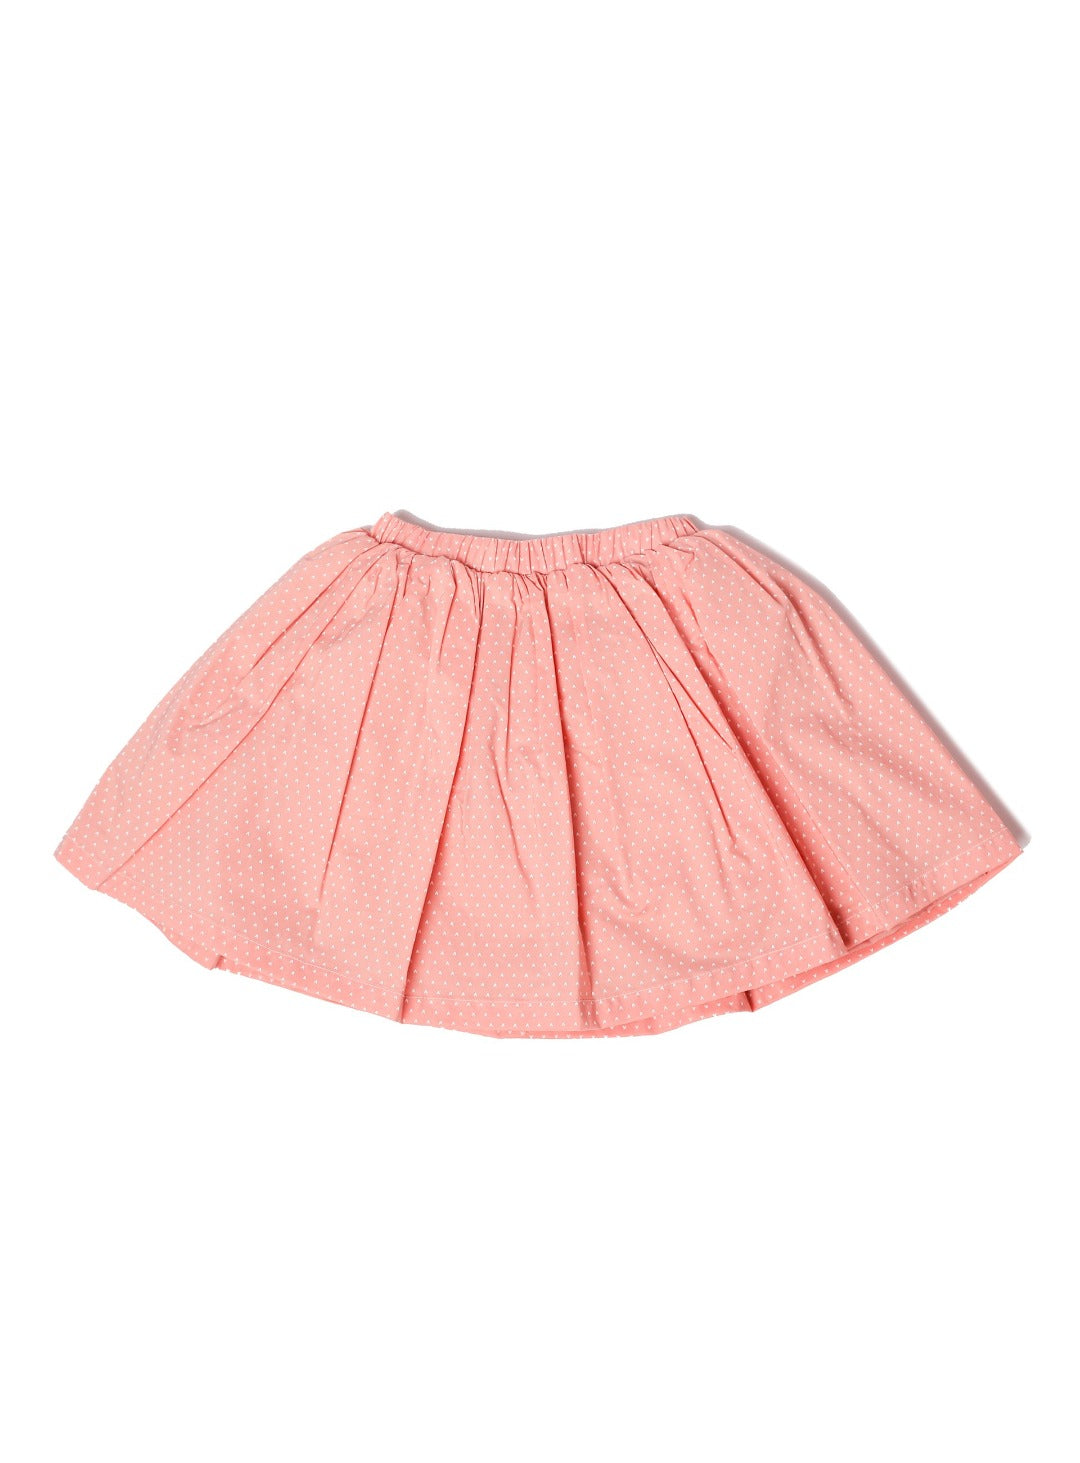 peach pink skater skirt with mini hearts pattern